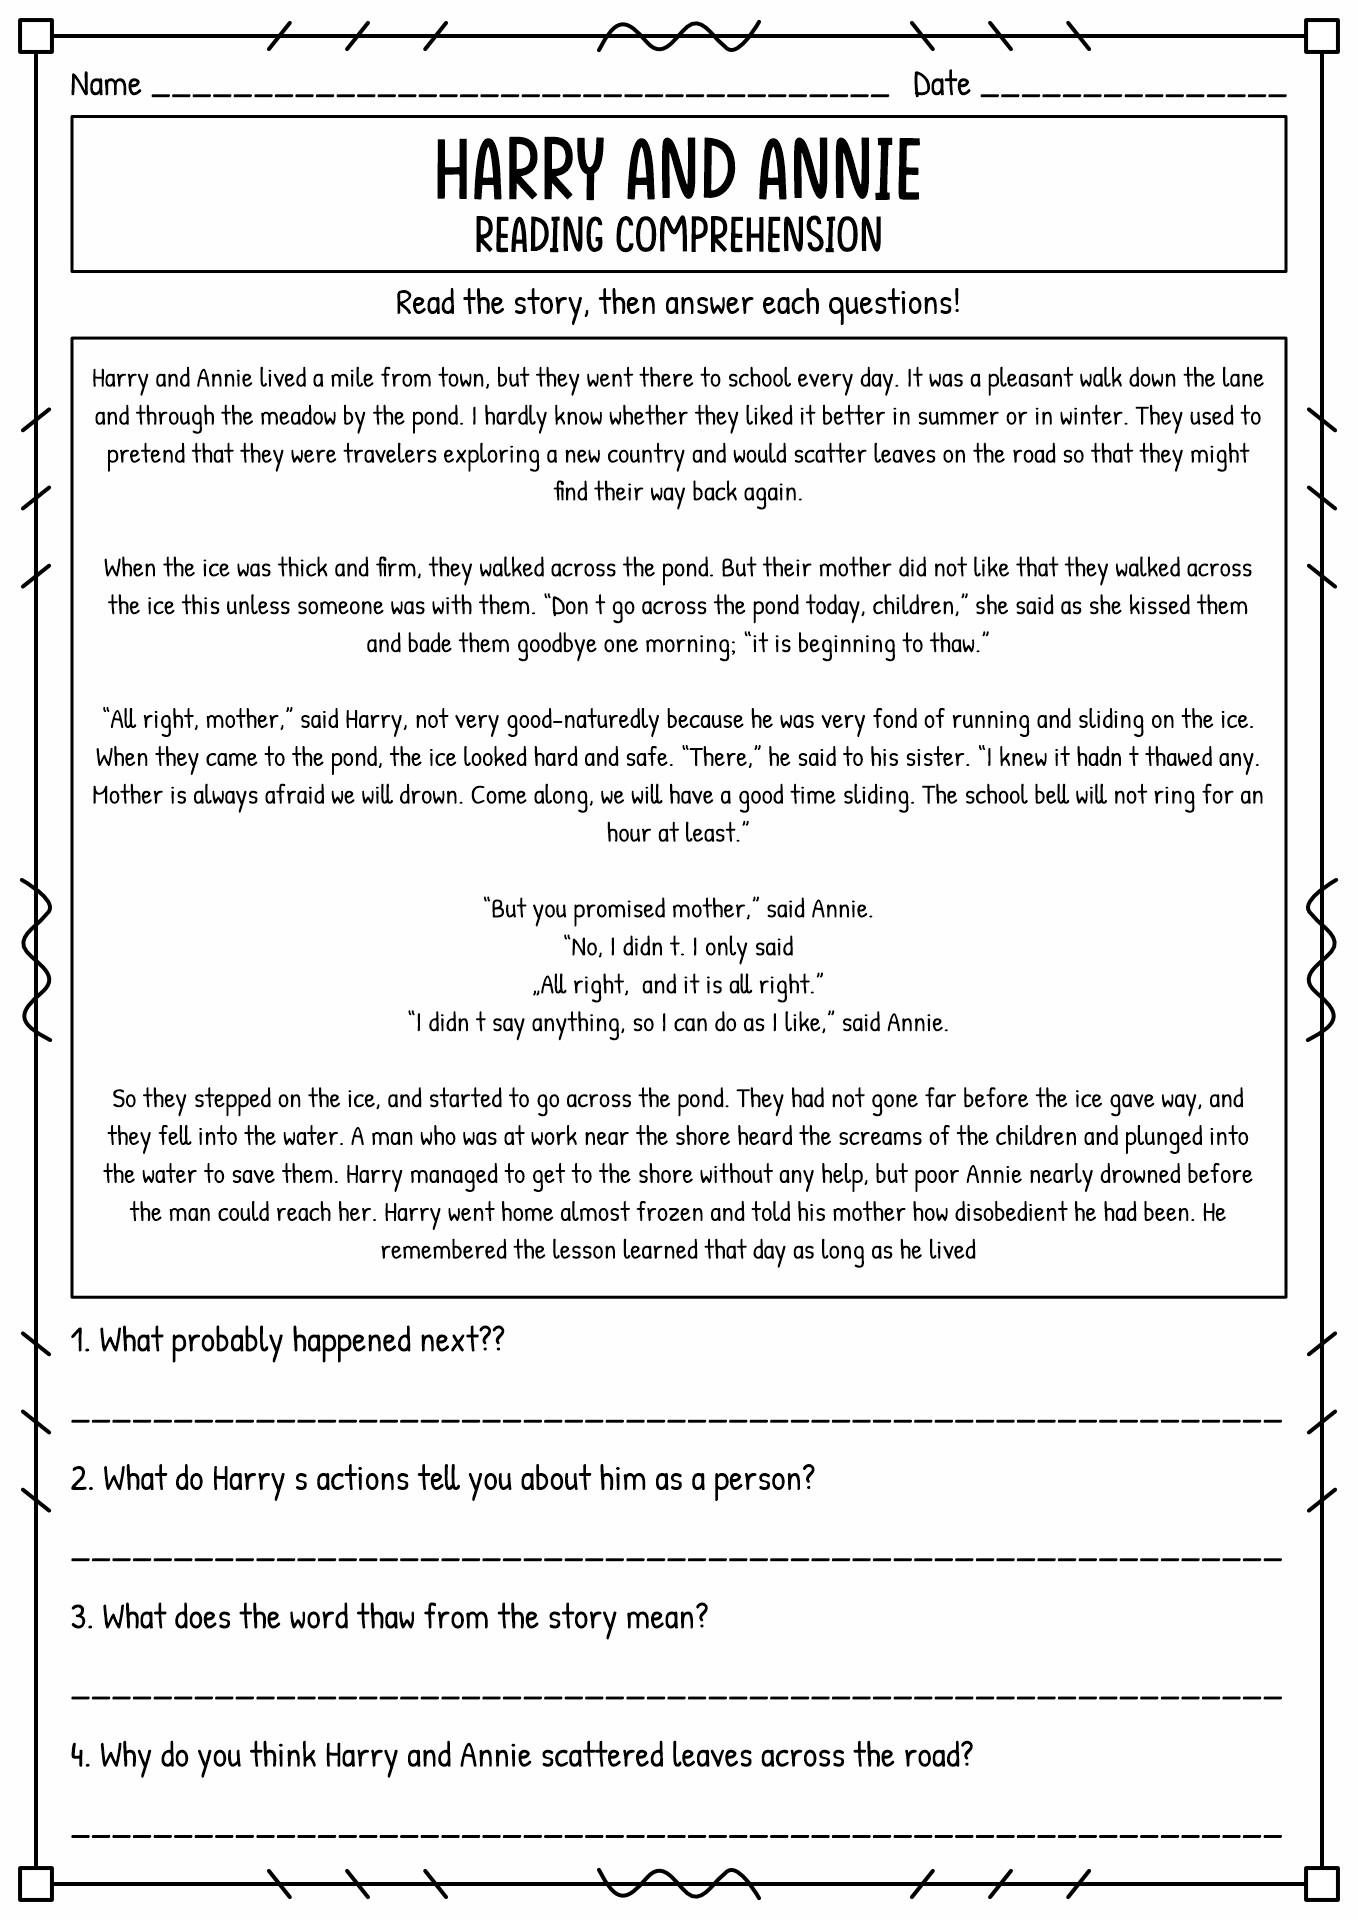 Reading Comprehension Test Questions